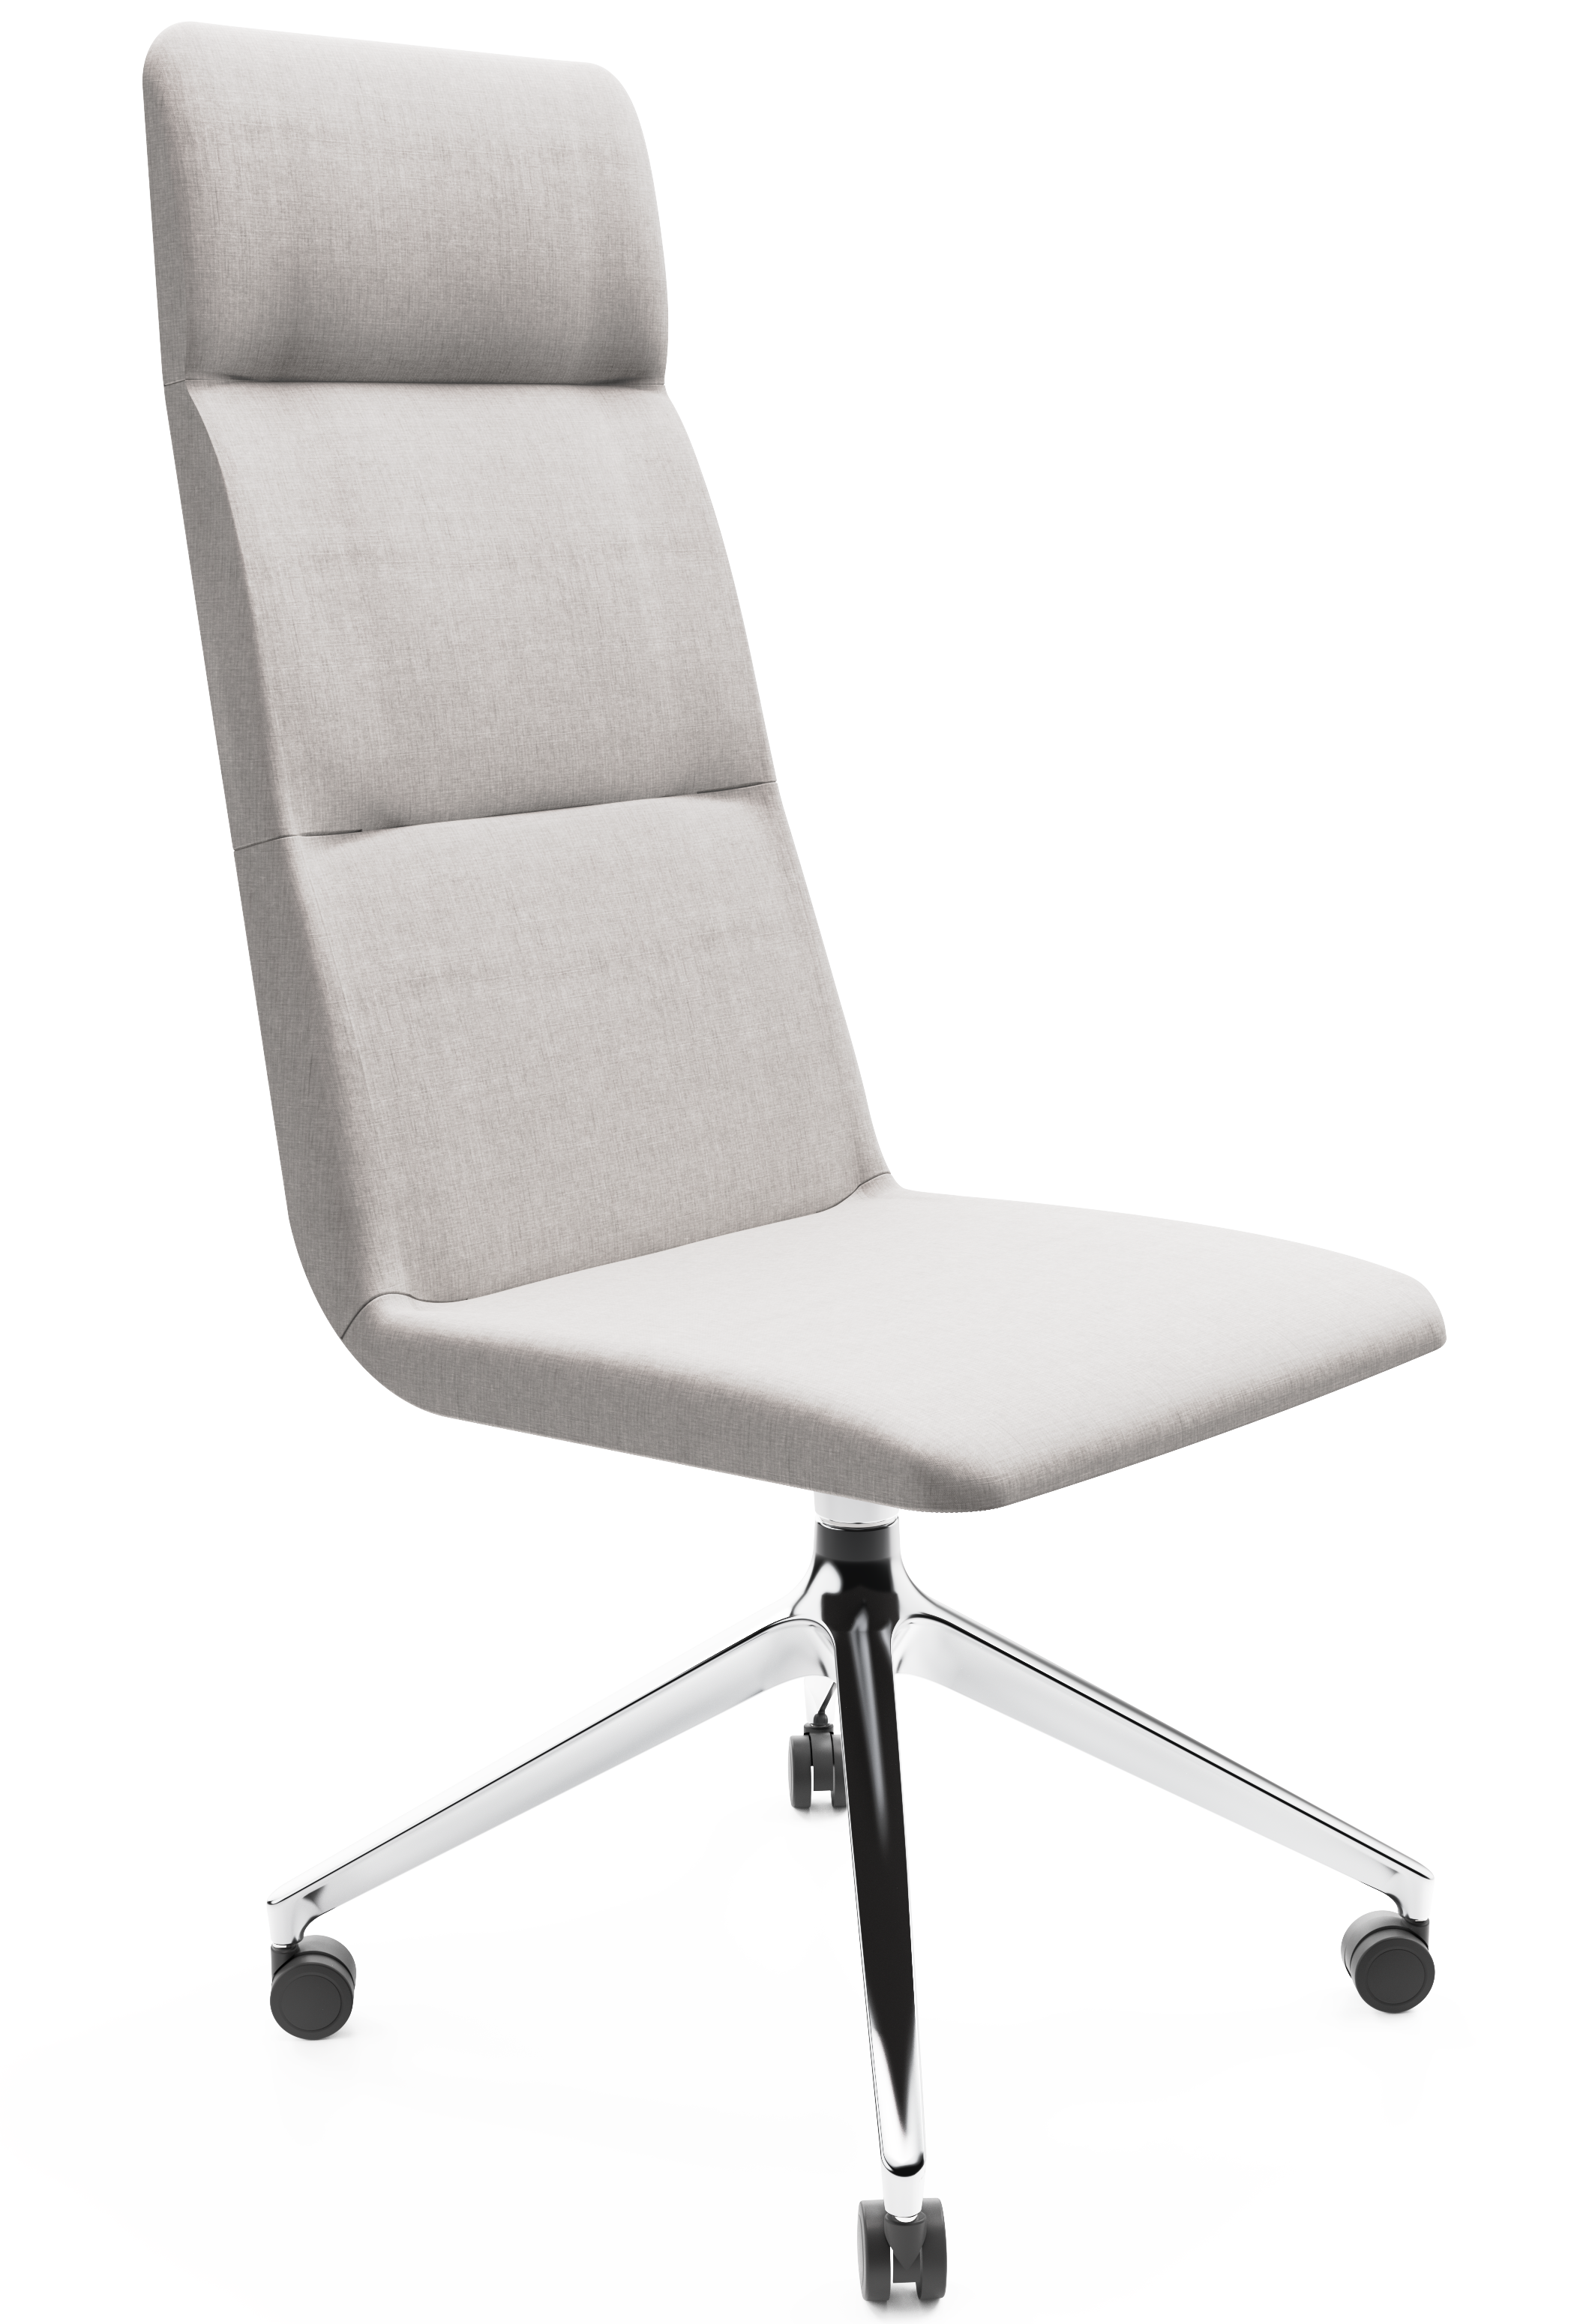 WS - Accord high 4 star base with castors chair - chrome - remix 126 - front angle1